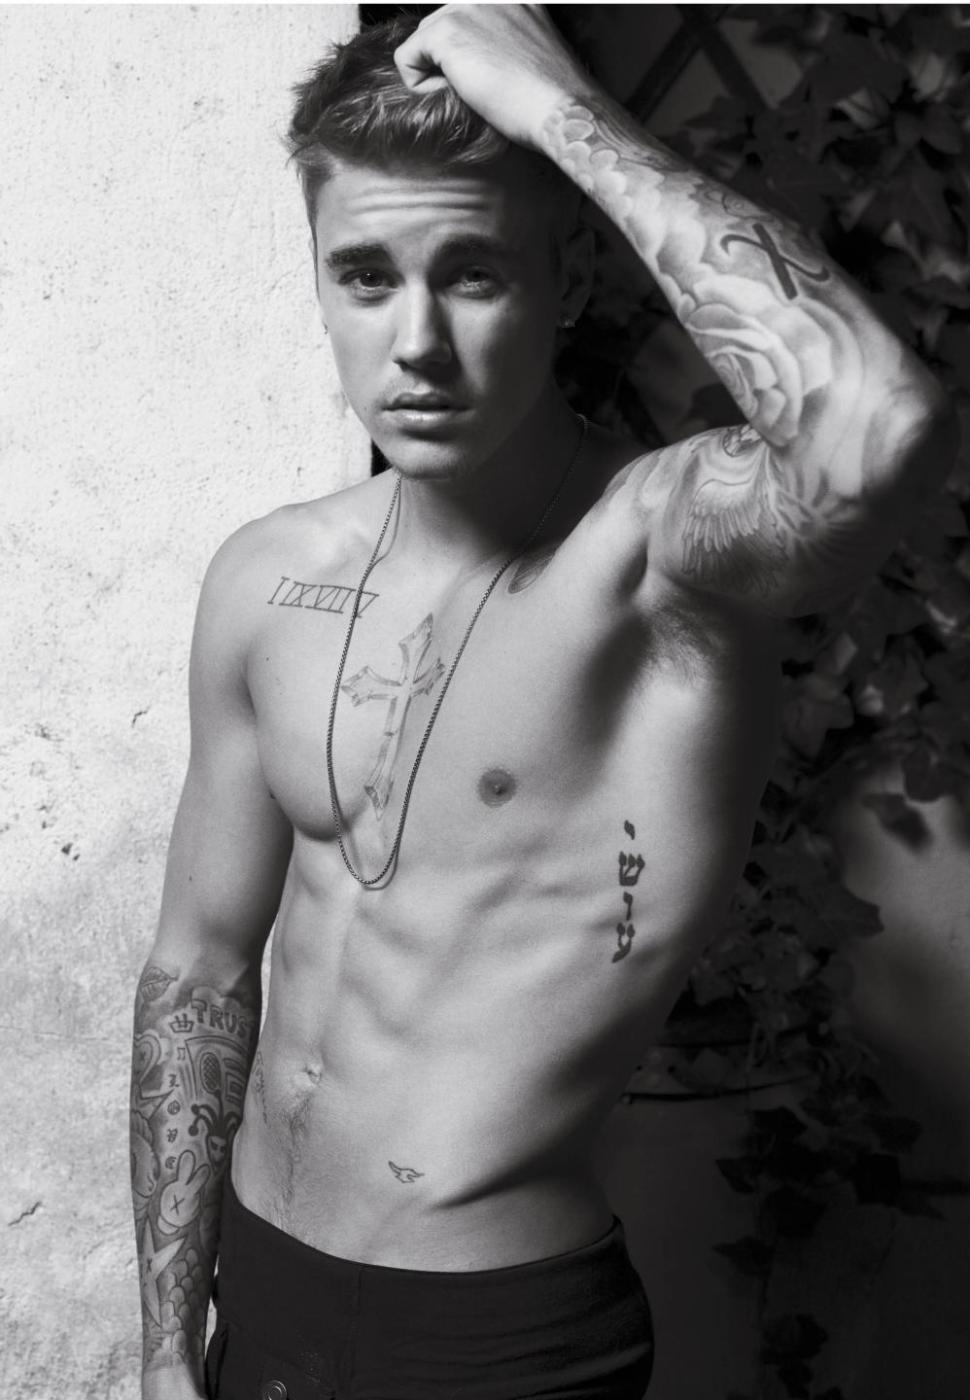 Tat’s entertainment: Justin Bieber says he plans to get into fashion.